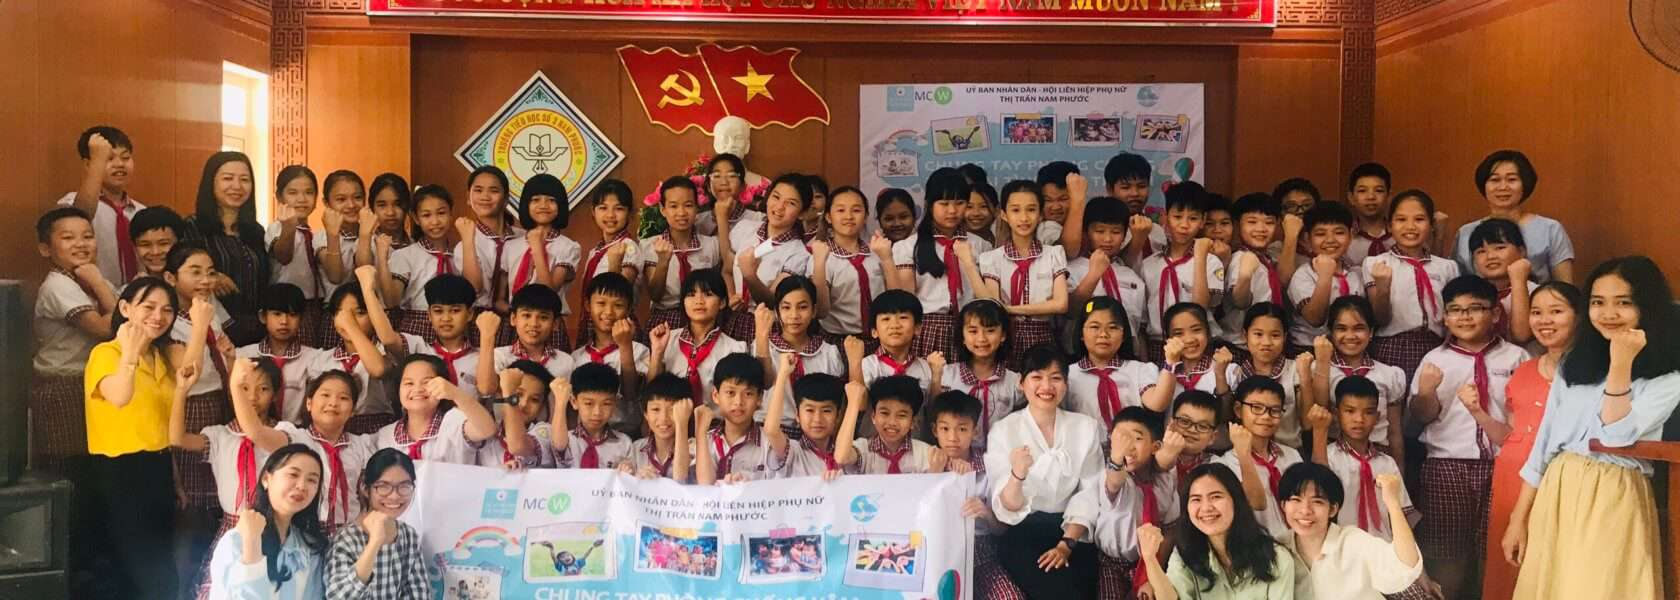 Preventing Child Sexual Abuse in Vietnam The Story of My Duong